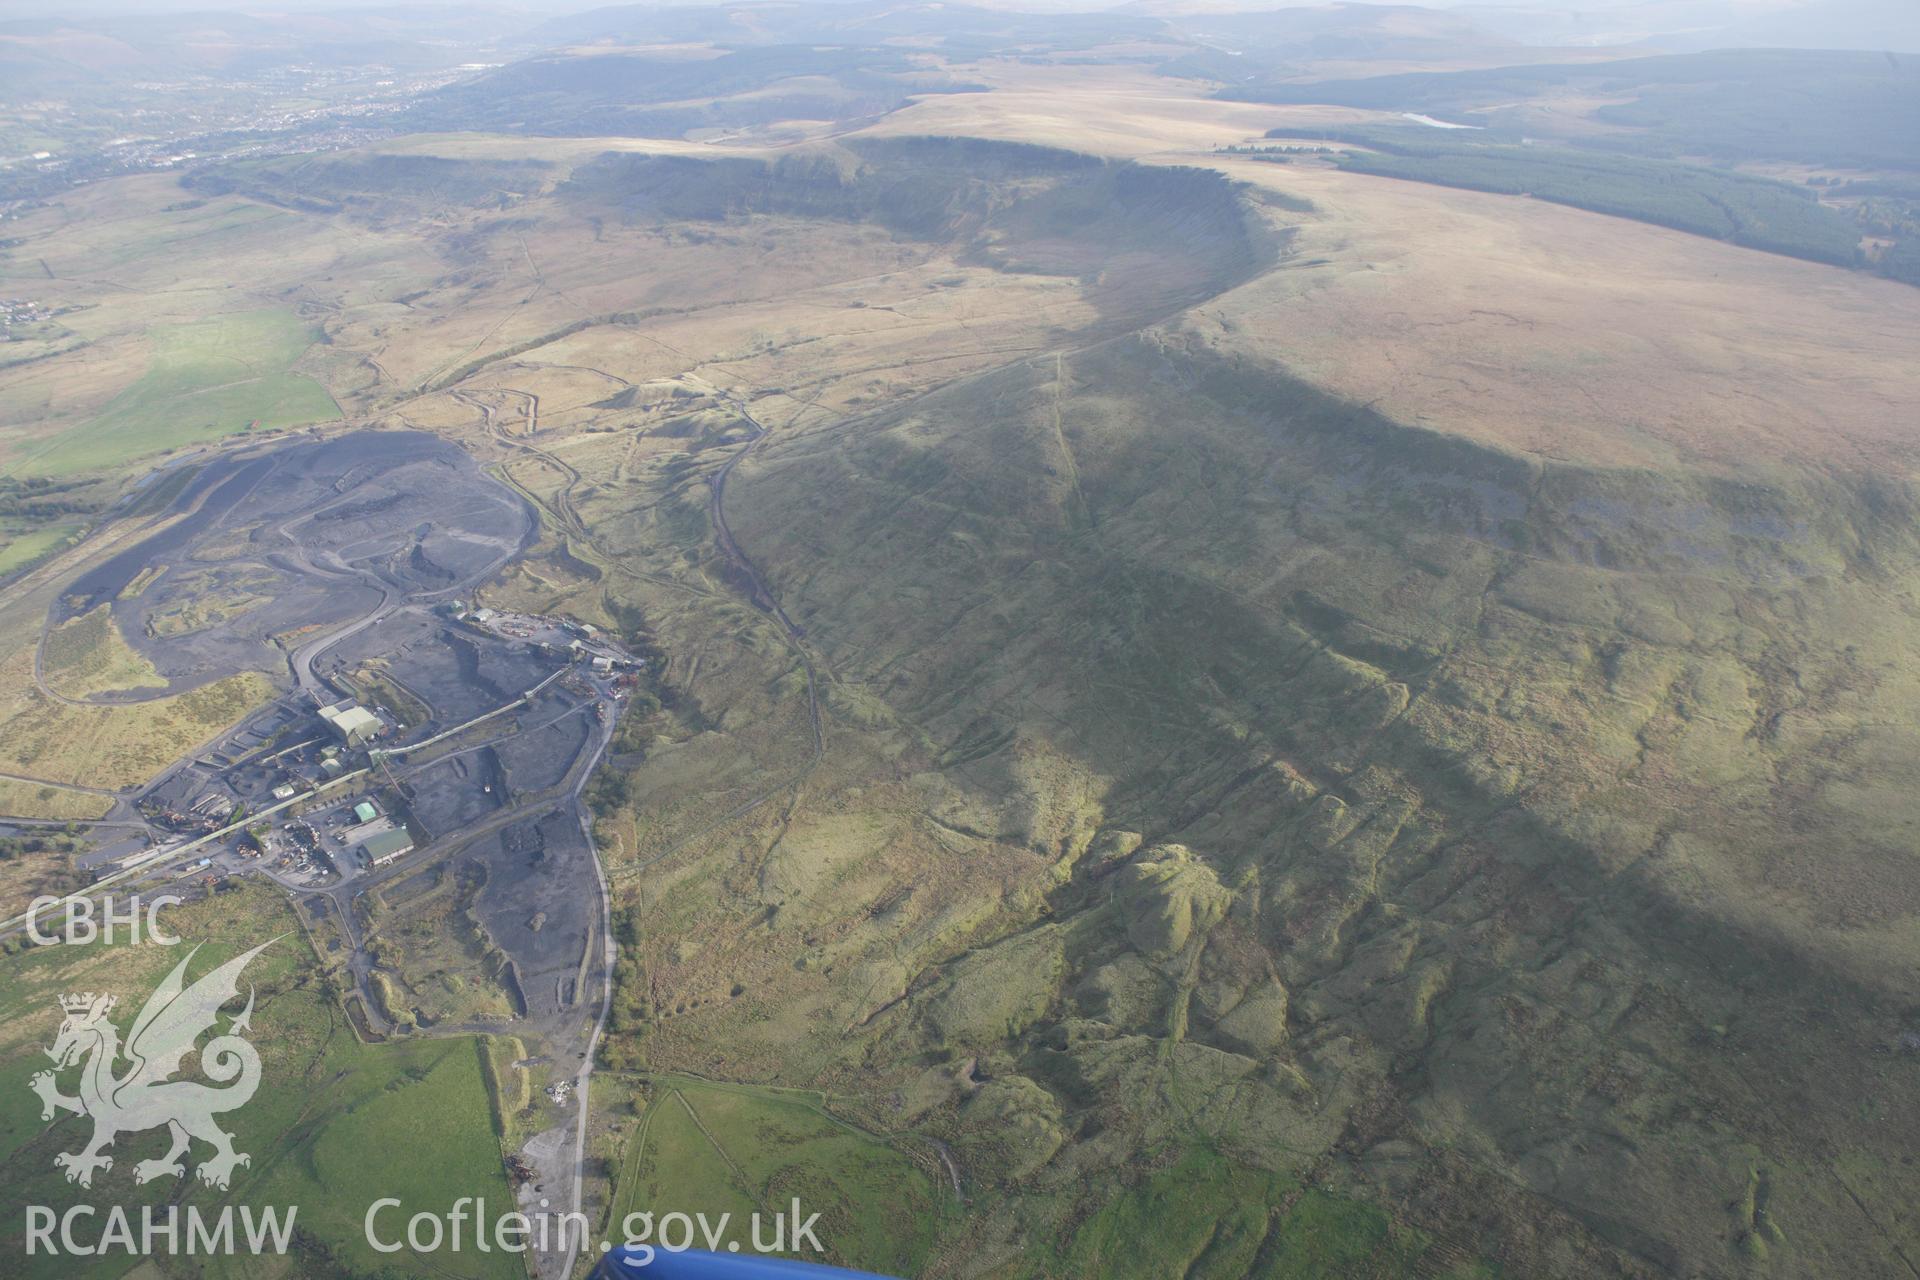 RCAHMW colour oblique aerial photograph of Tower Drift Mine, Hirwaun. Taken on 14 October 2009 by Toby Driver